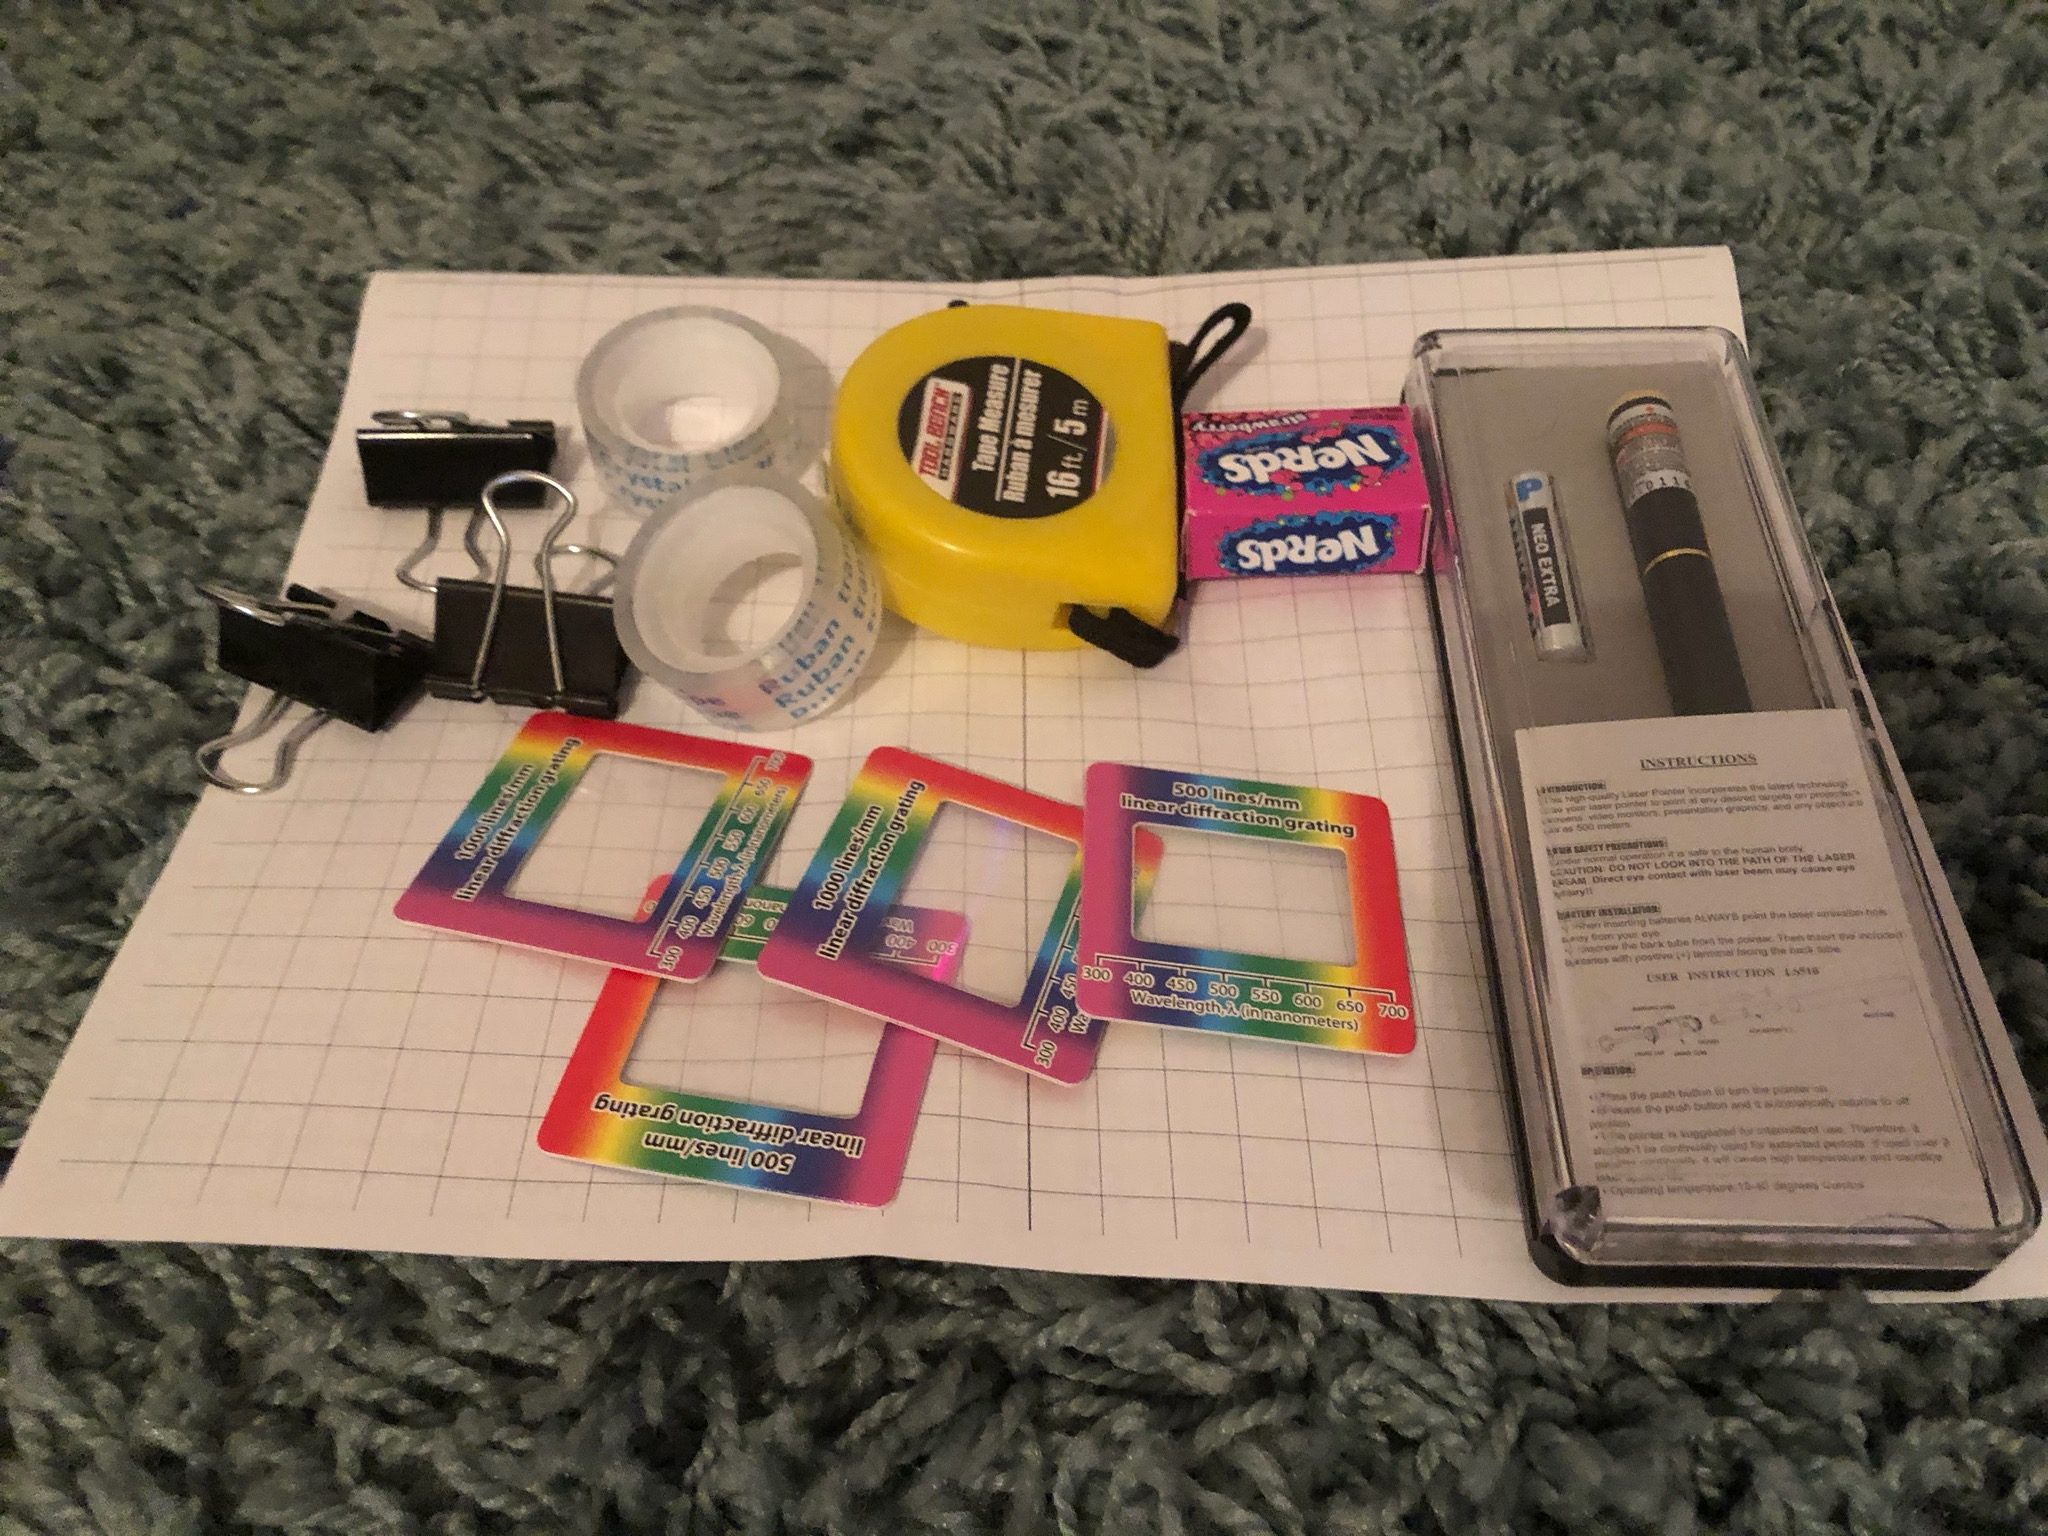 Three binder clips, a tape measure, four filters, two rolls of tape, a laser pointer and a container of Nerds candy on graph paper.